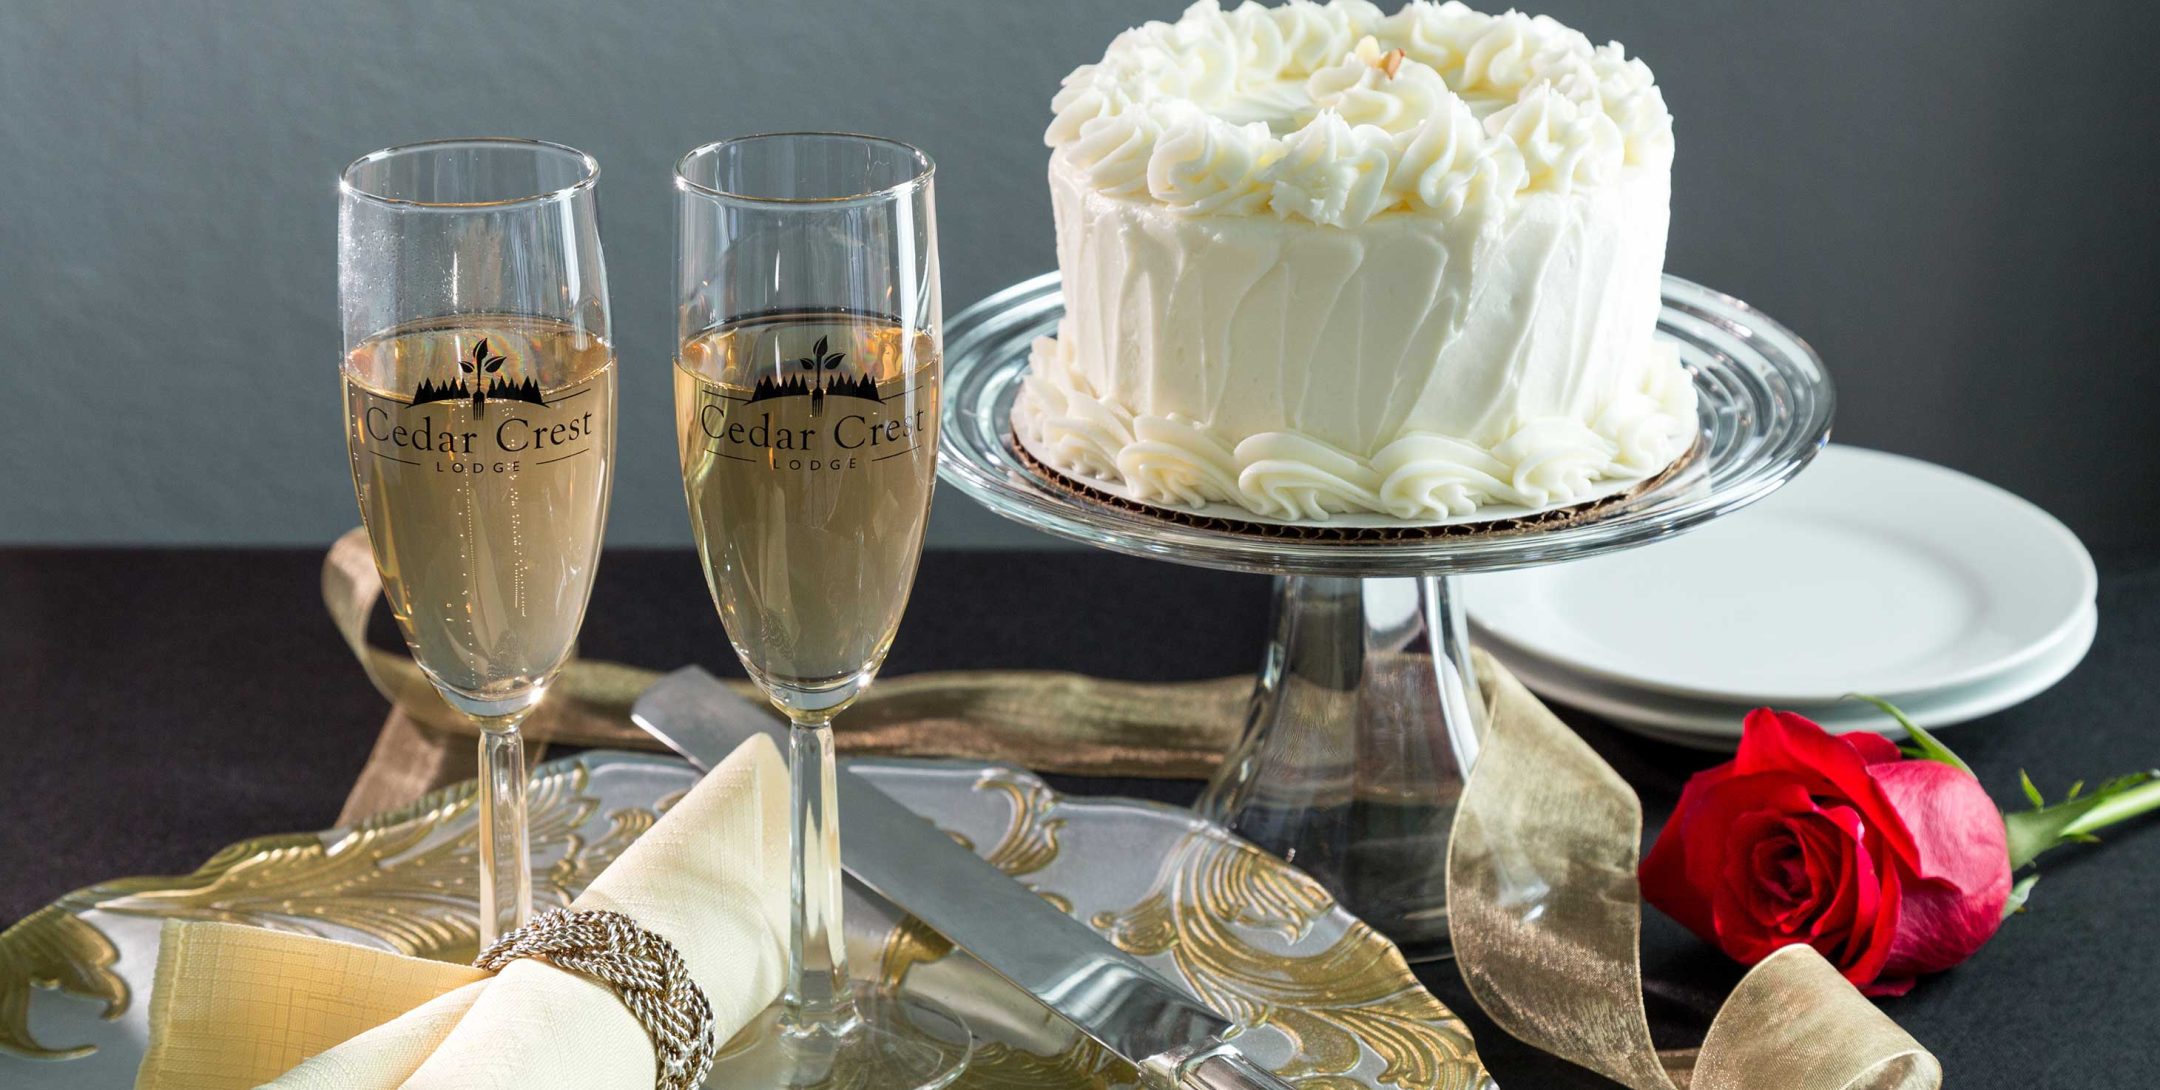 Kansas wedding cake and two glasses of Champagne